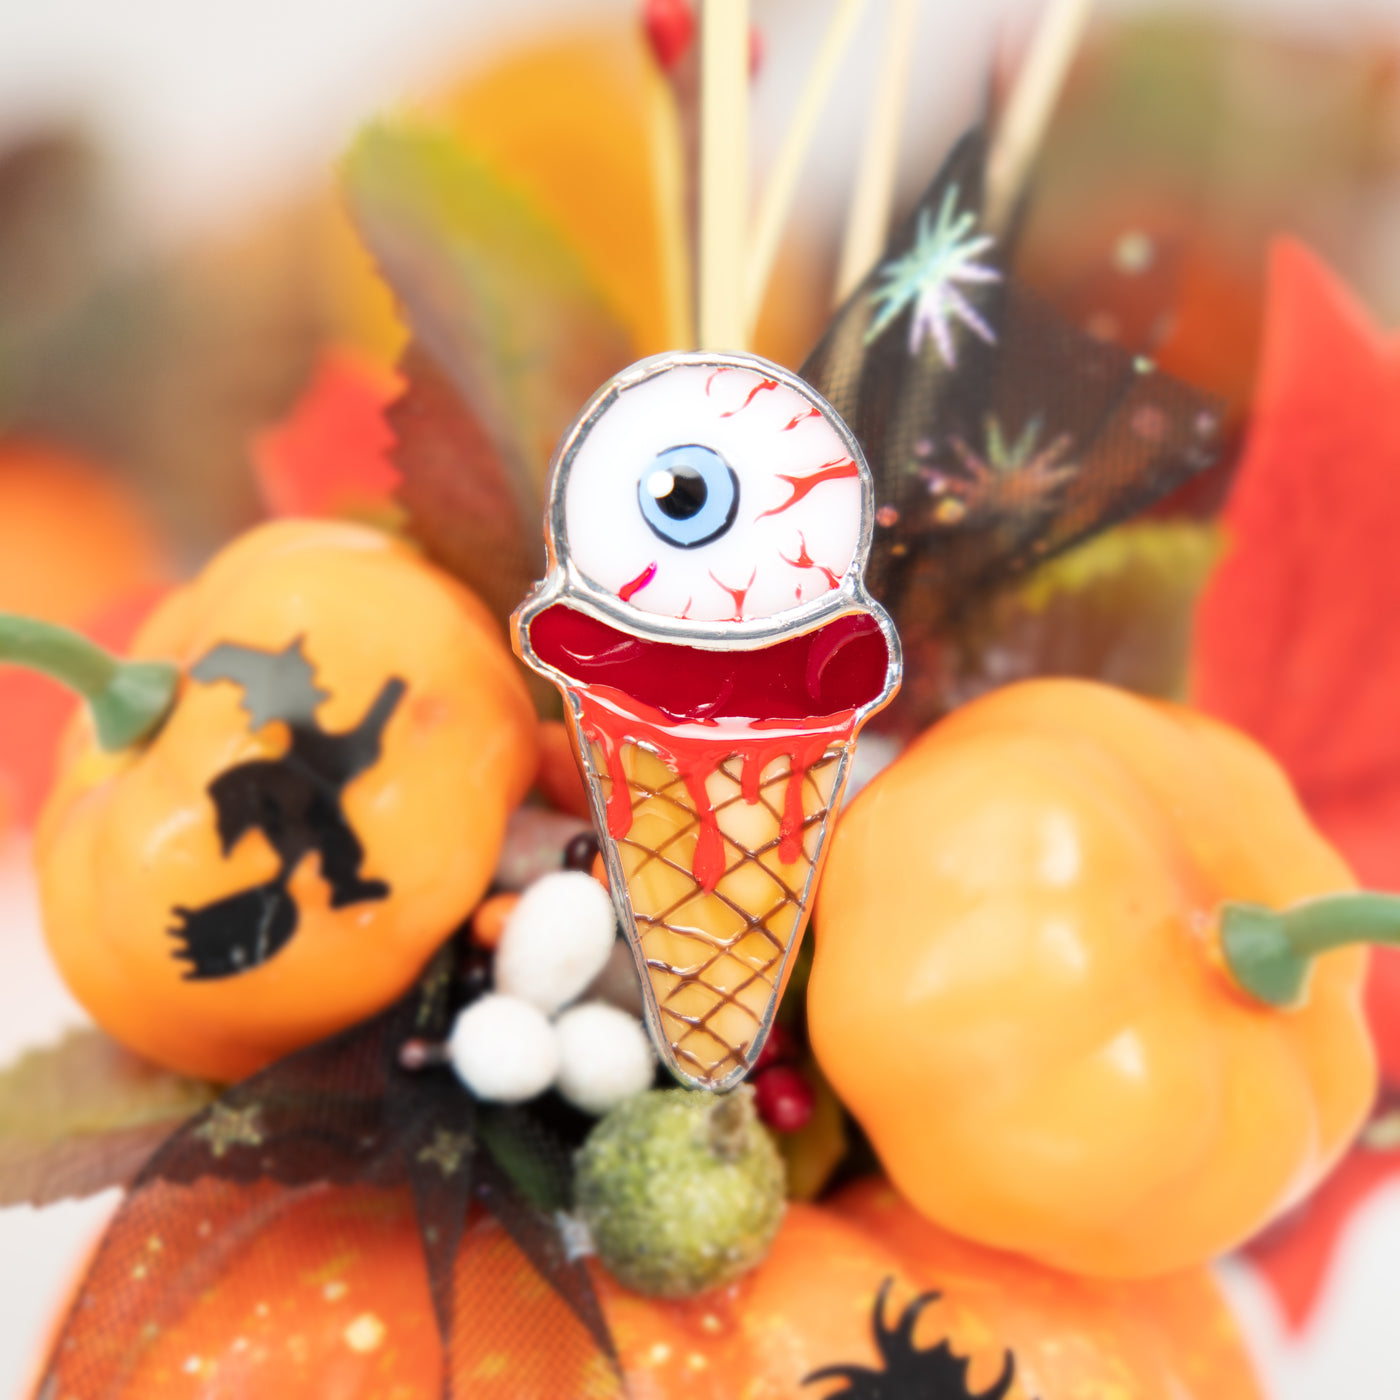 Halloween ice-cream with the torn out eye pin of stained glass